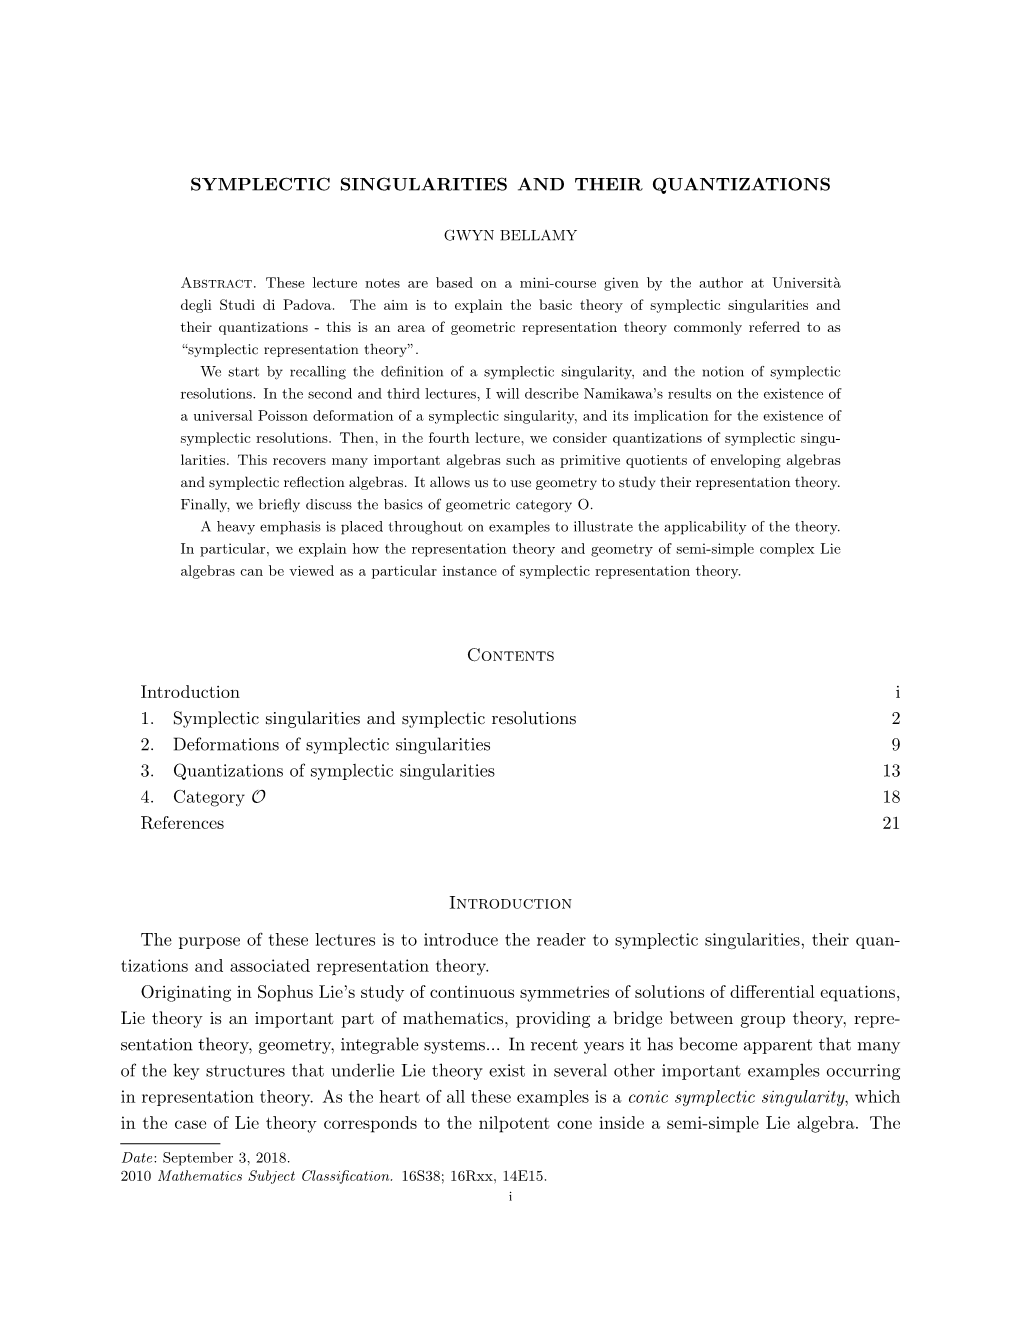 SYMPLECTIC SINGULARITIES and THEIR QUANTIZATIONS Contents Introduction I 1. Symplectic Singularities and Symplectic Resolutions